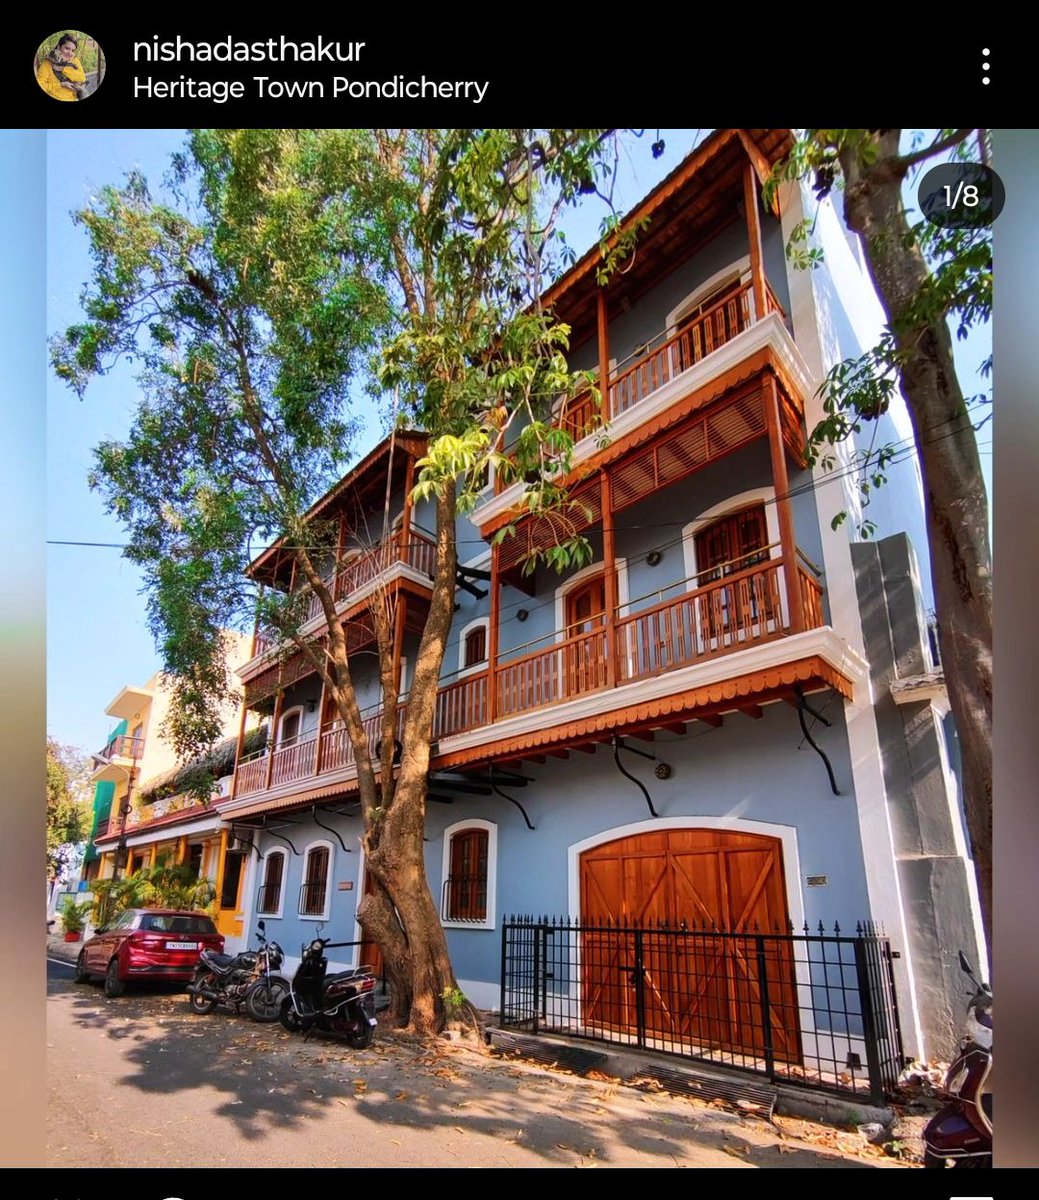 There is something about #old towns and old houses. 
Say hello to #heritage town in #pondicherry . #SouthIndian tales.